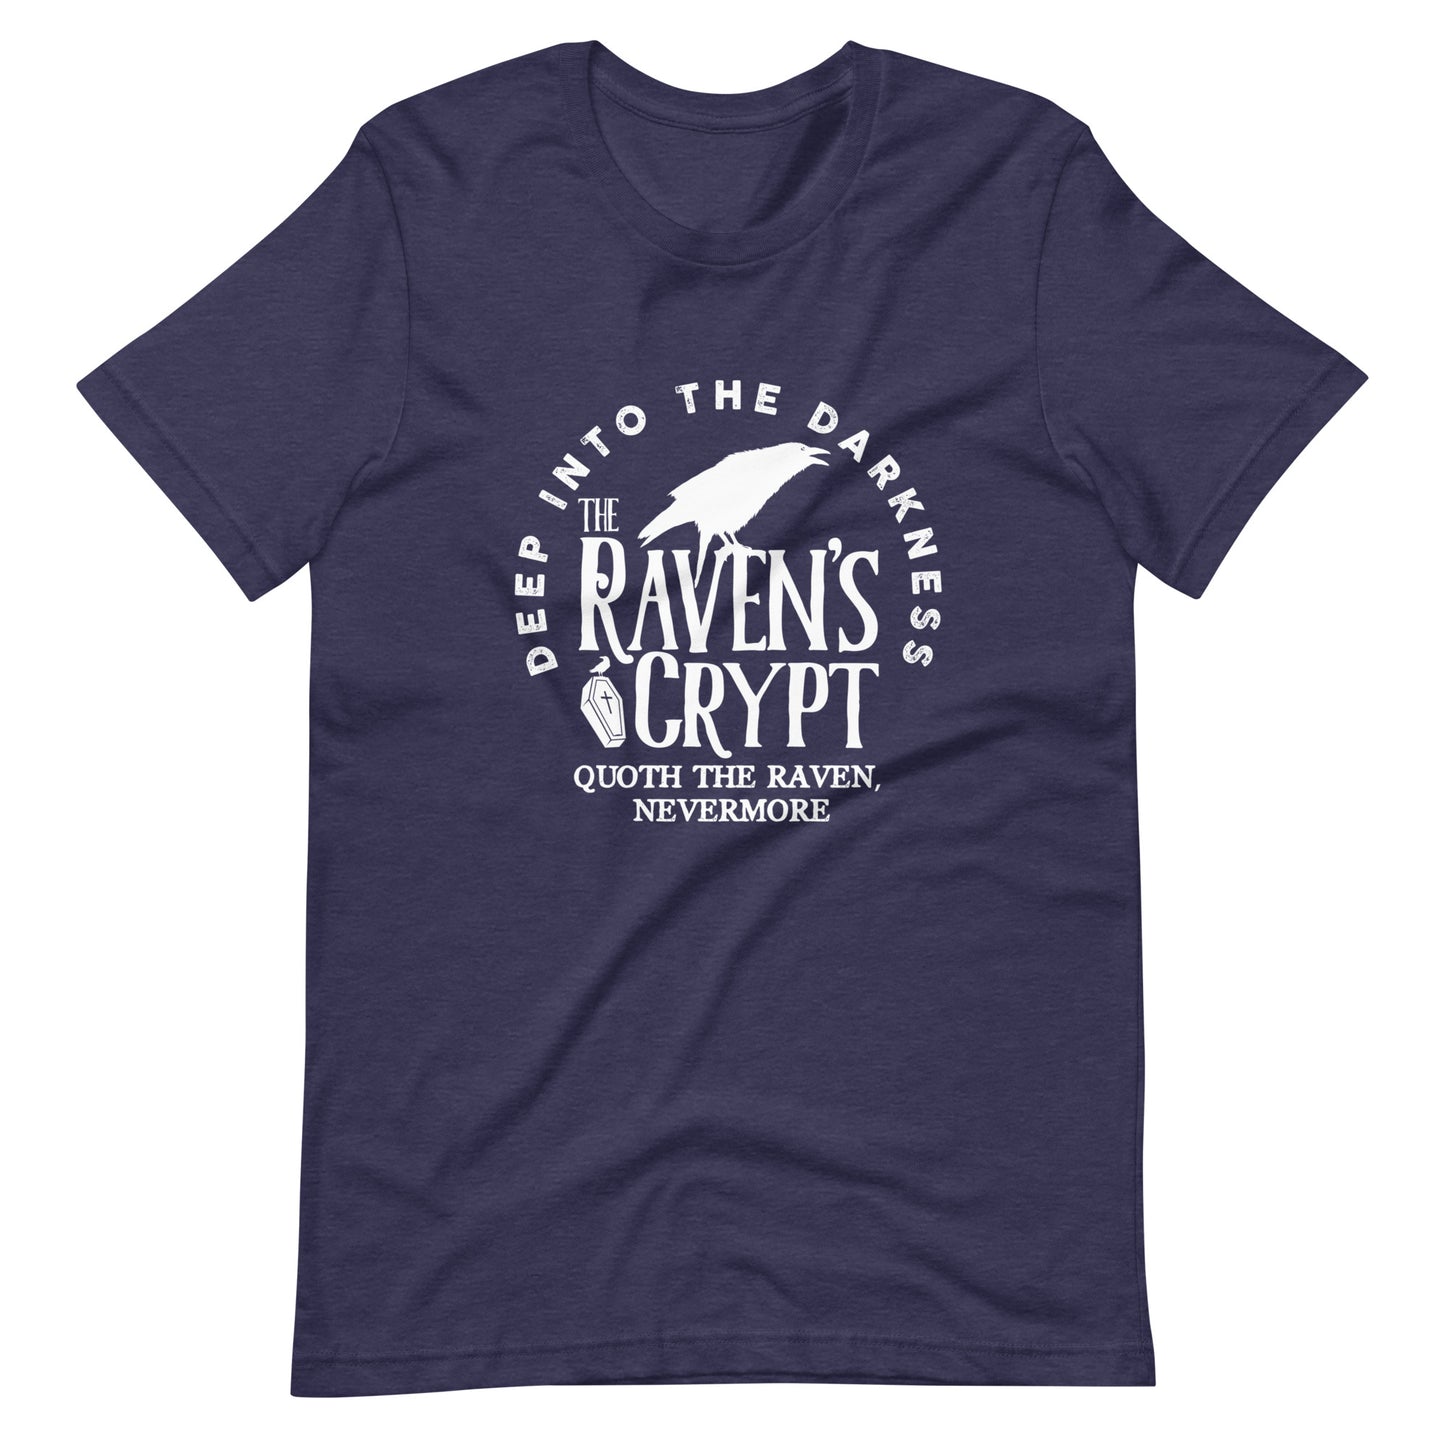 Deep Into the Darkness The Raven's Crypt - Men's t-shirt - Heather Midnight Navy